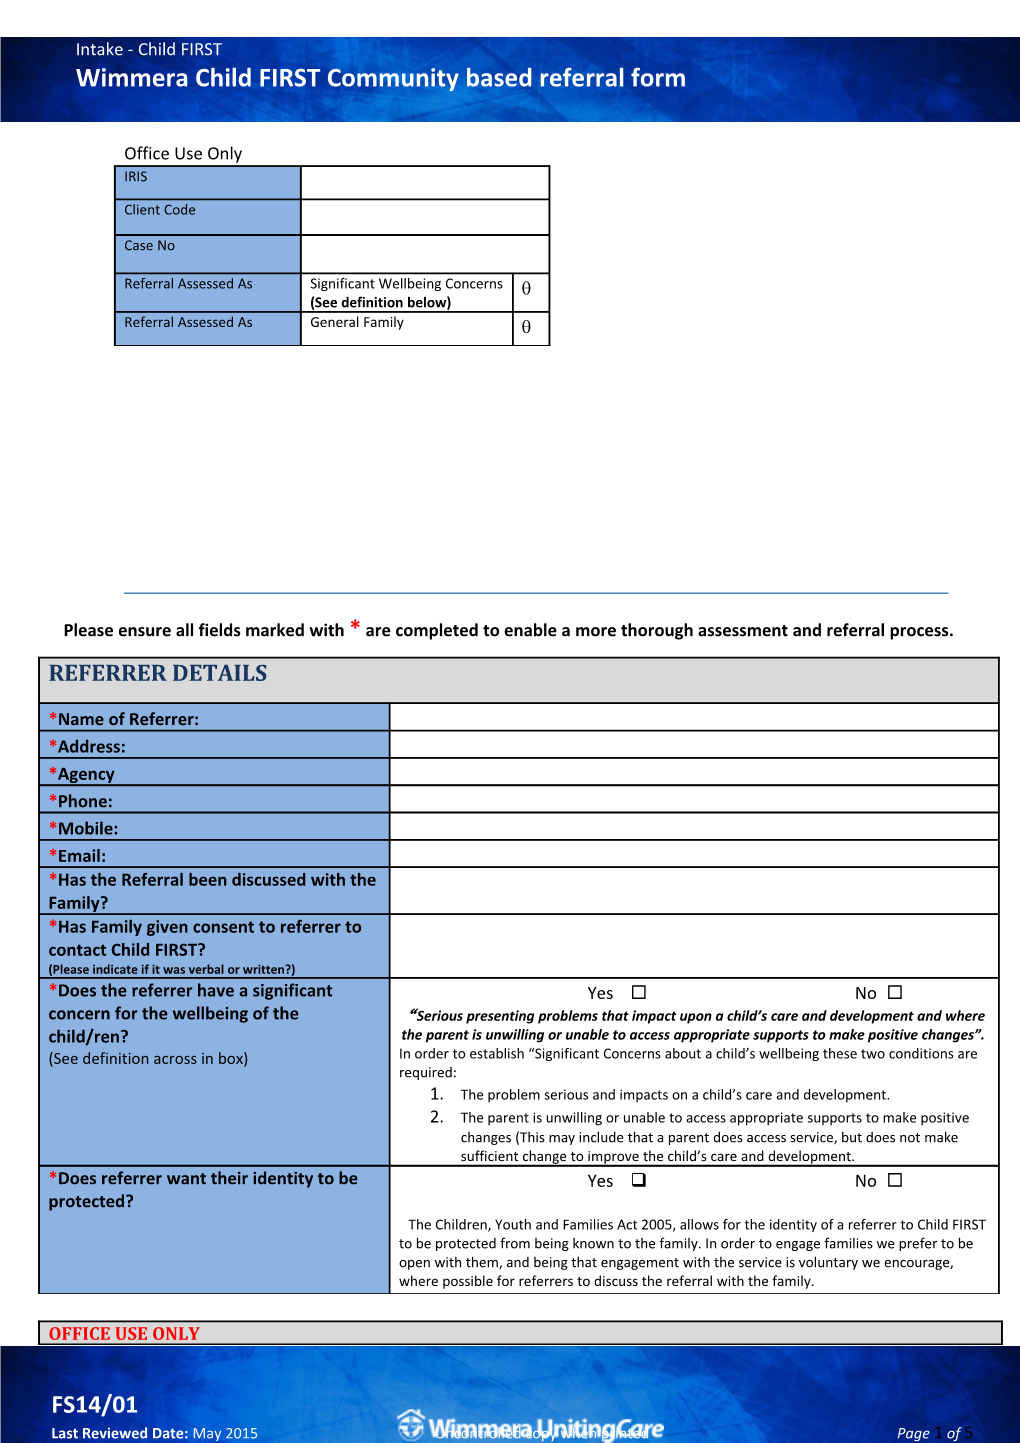 Child FIRST Referral Form